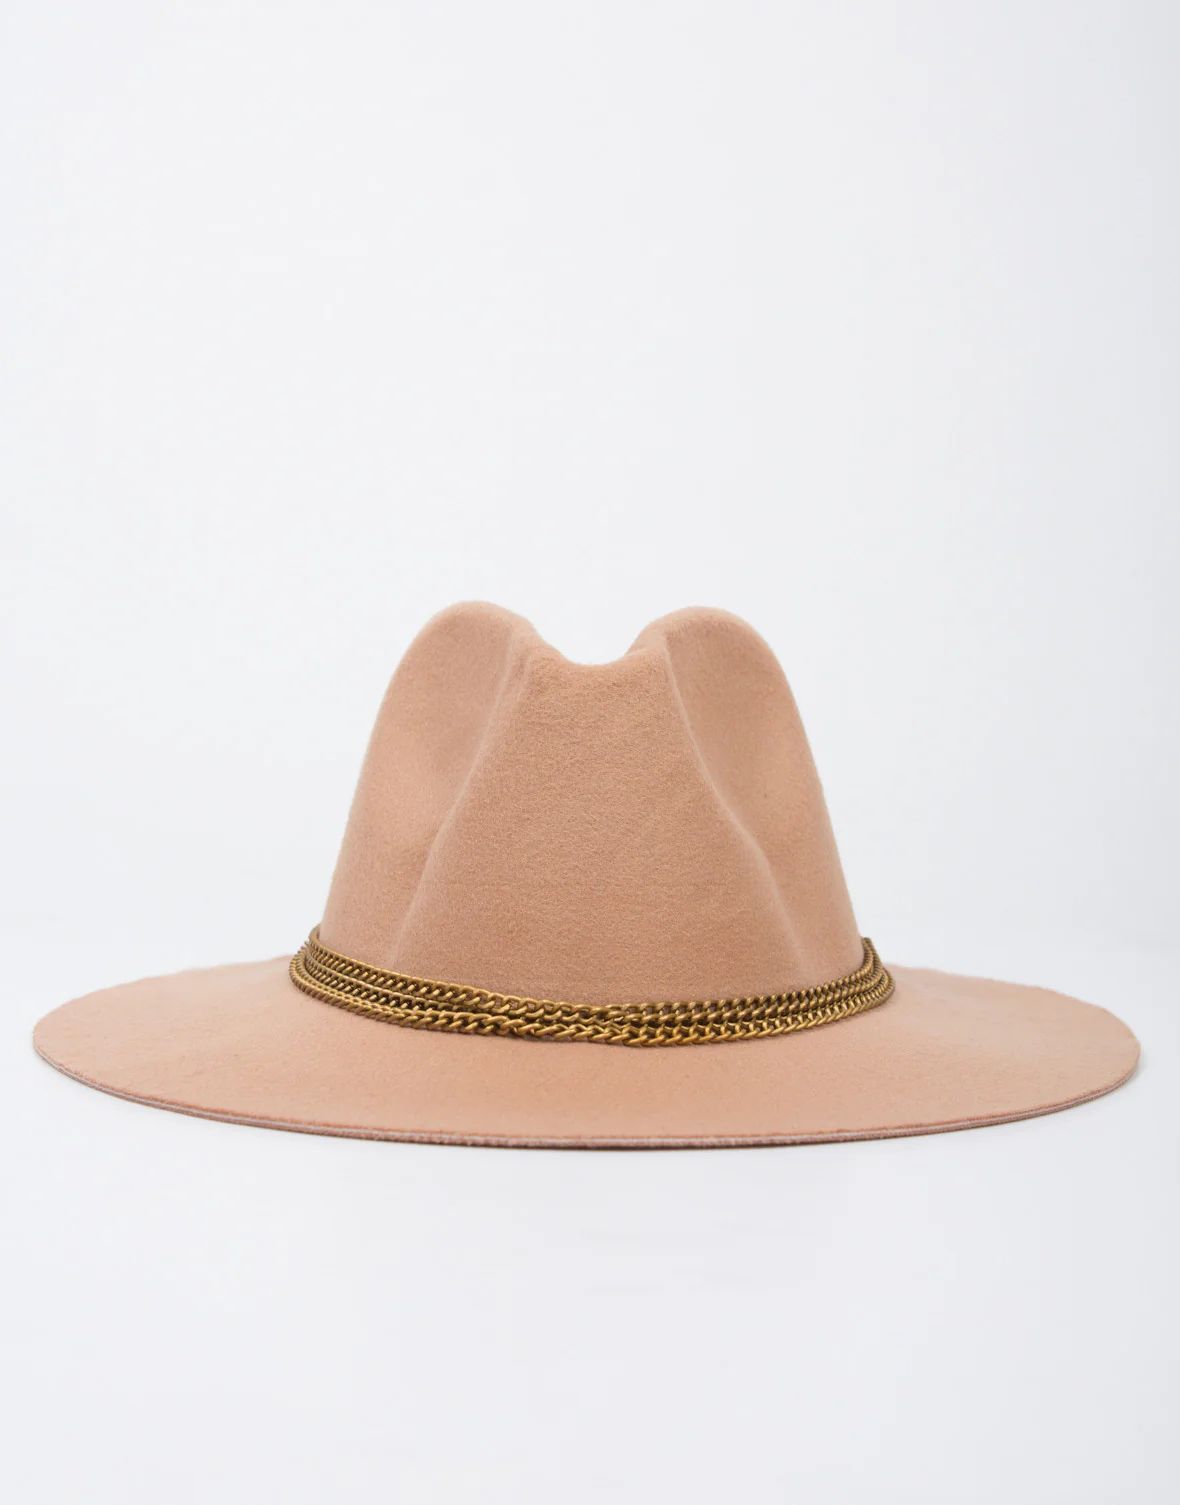 Chained Fedora Hat | 2020ave.com